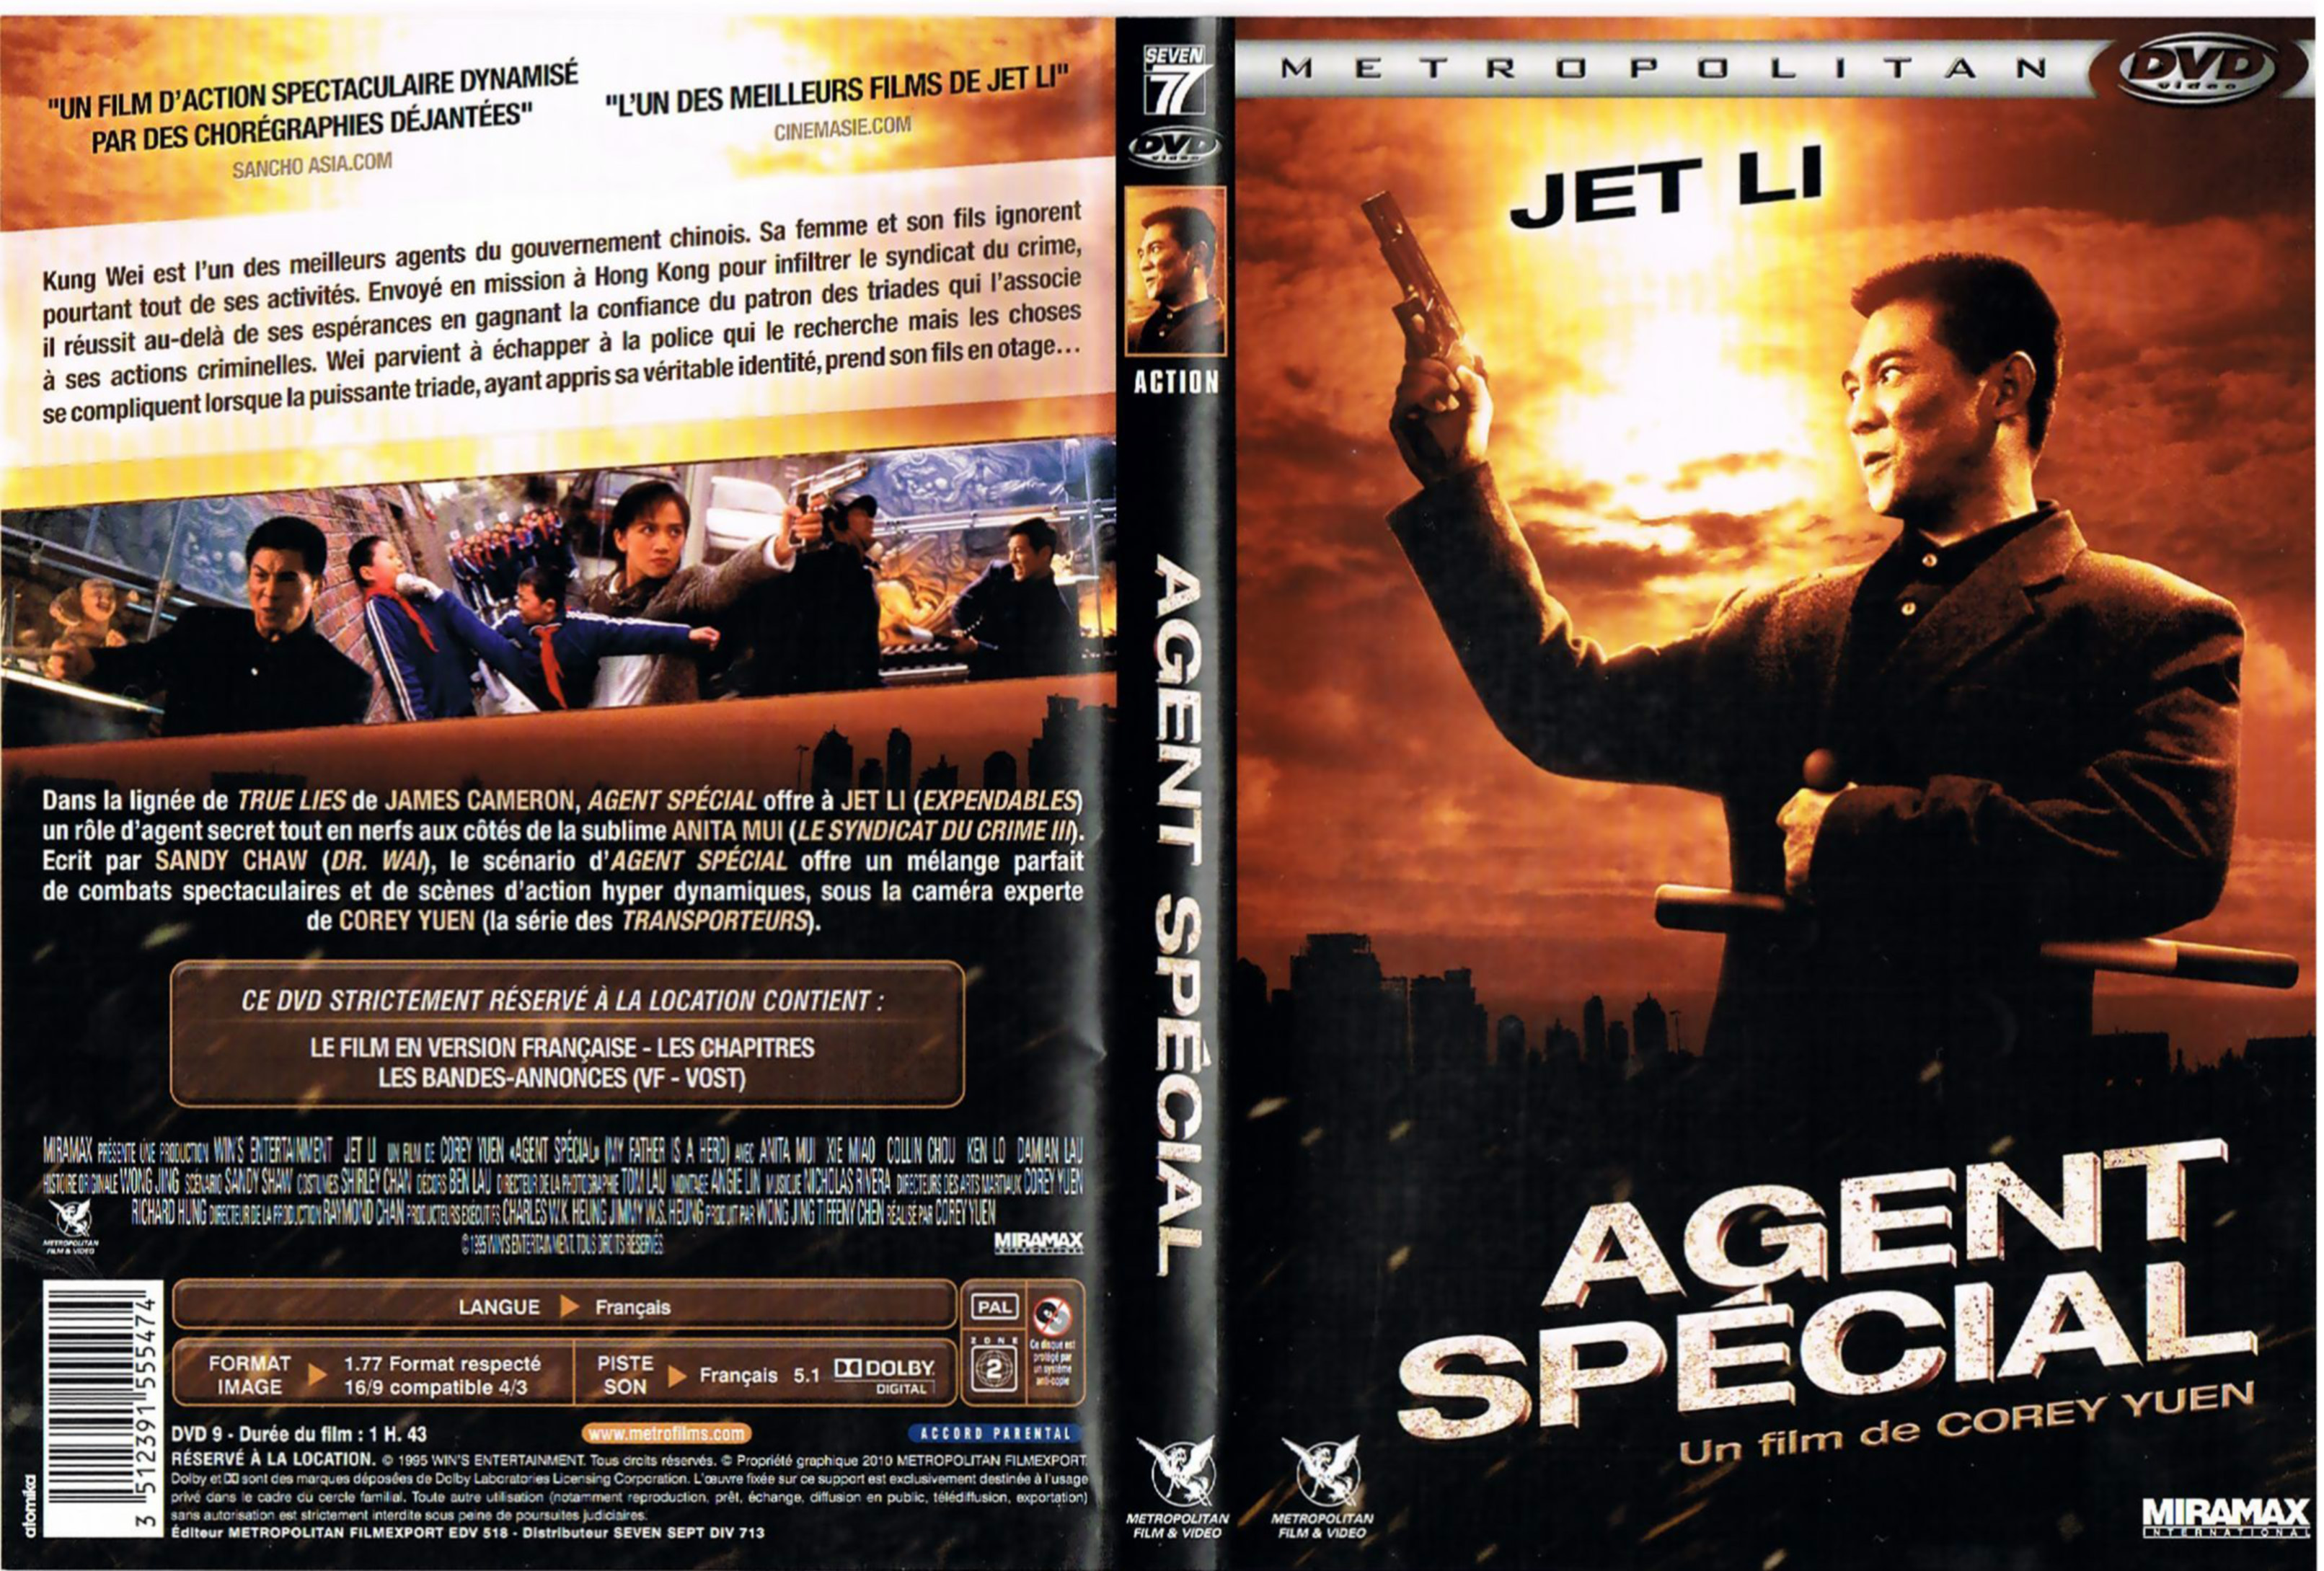 Jaquette DVD Agent special